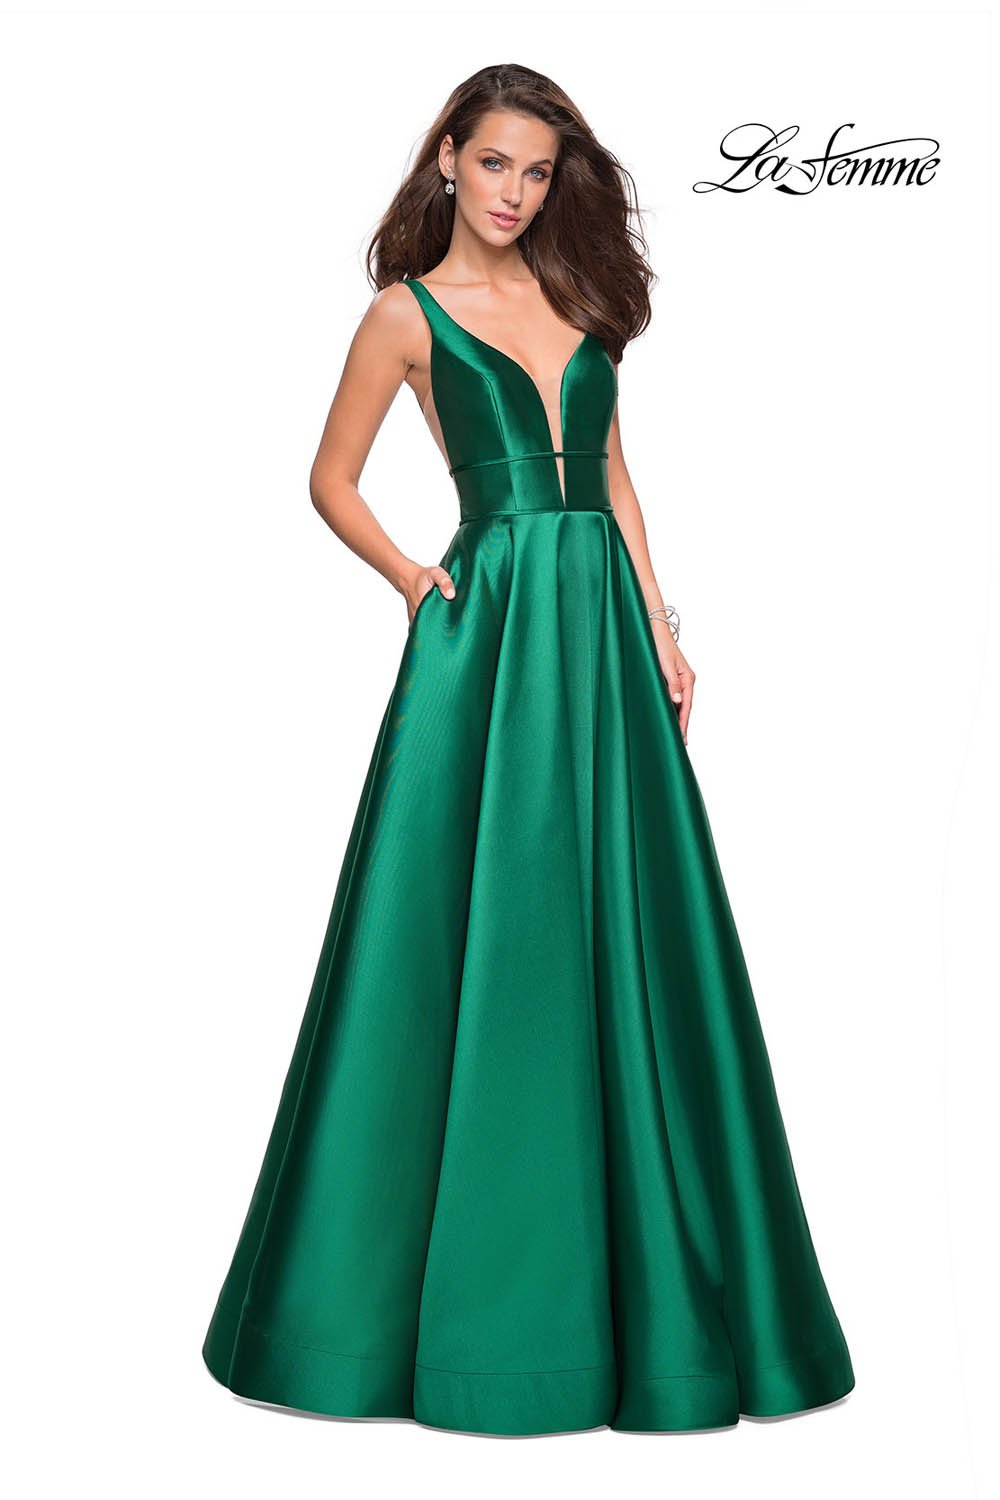 La Femme 26768 dress images in these colors: Bright Pink, Emerald, Pale Yellow, Sapphire Blue.